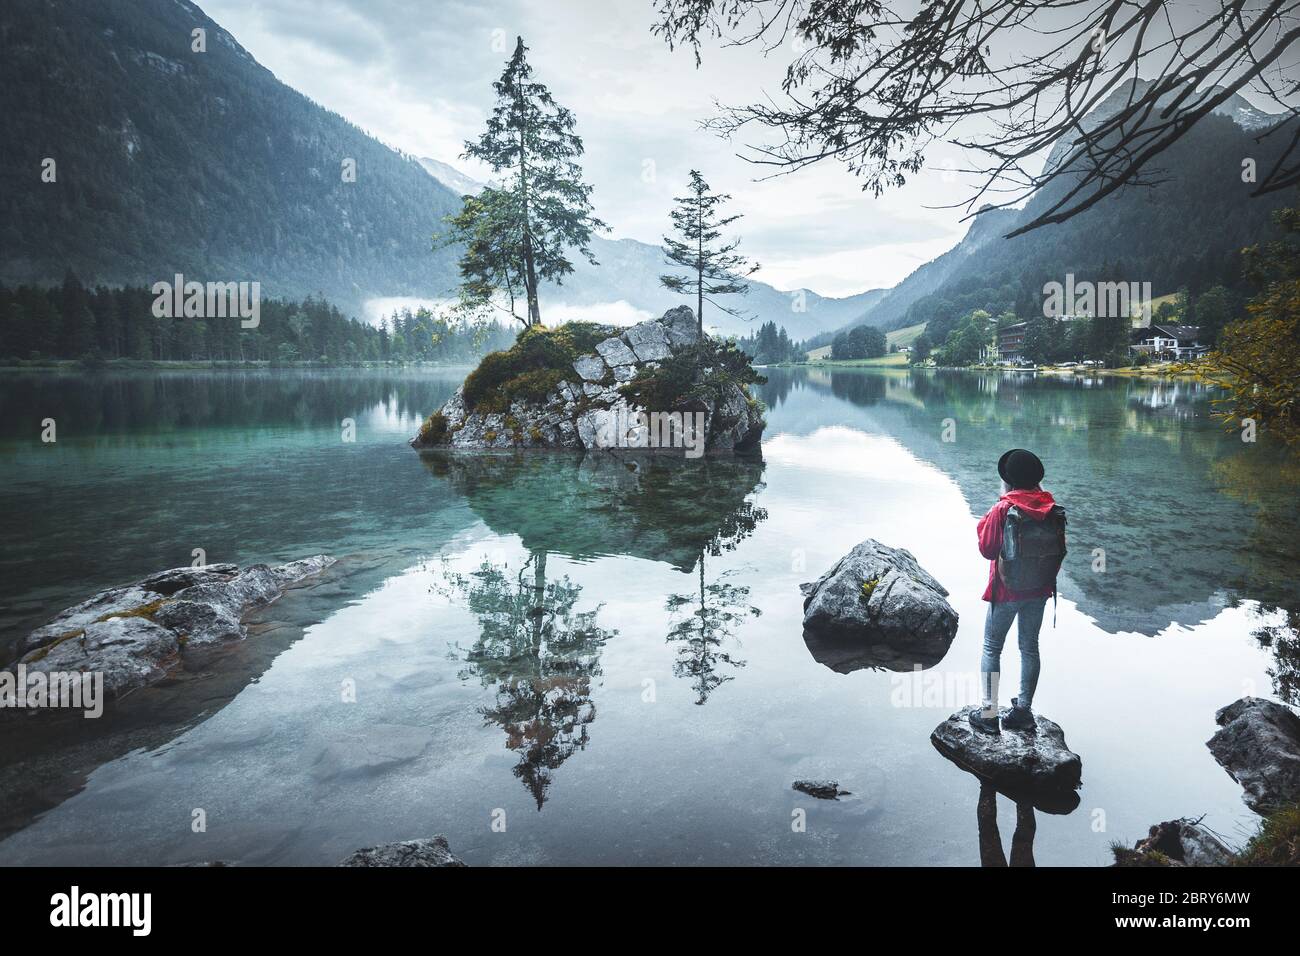 Scenic view of a beautiful woman standing on rock near lakem wearing a red jacket, a hat and a backpack looking at mountains, Lake Hintersee, Berchtes Stock Photo